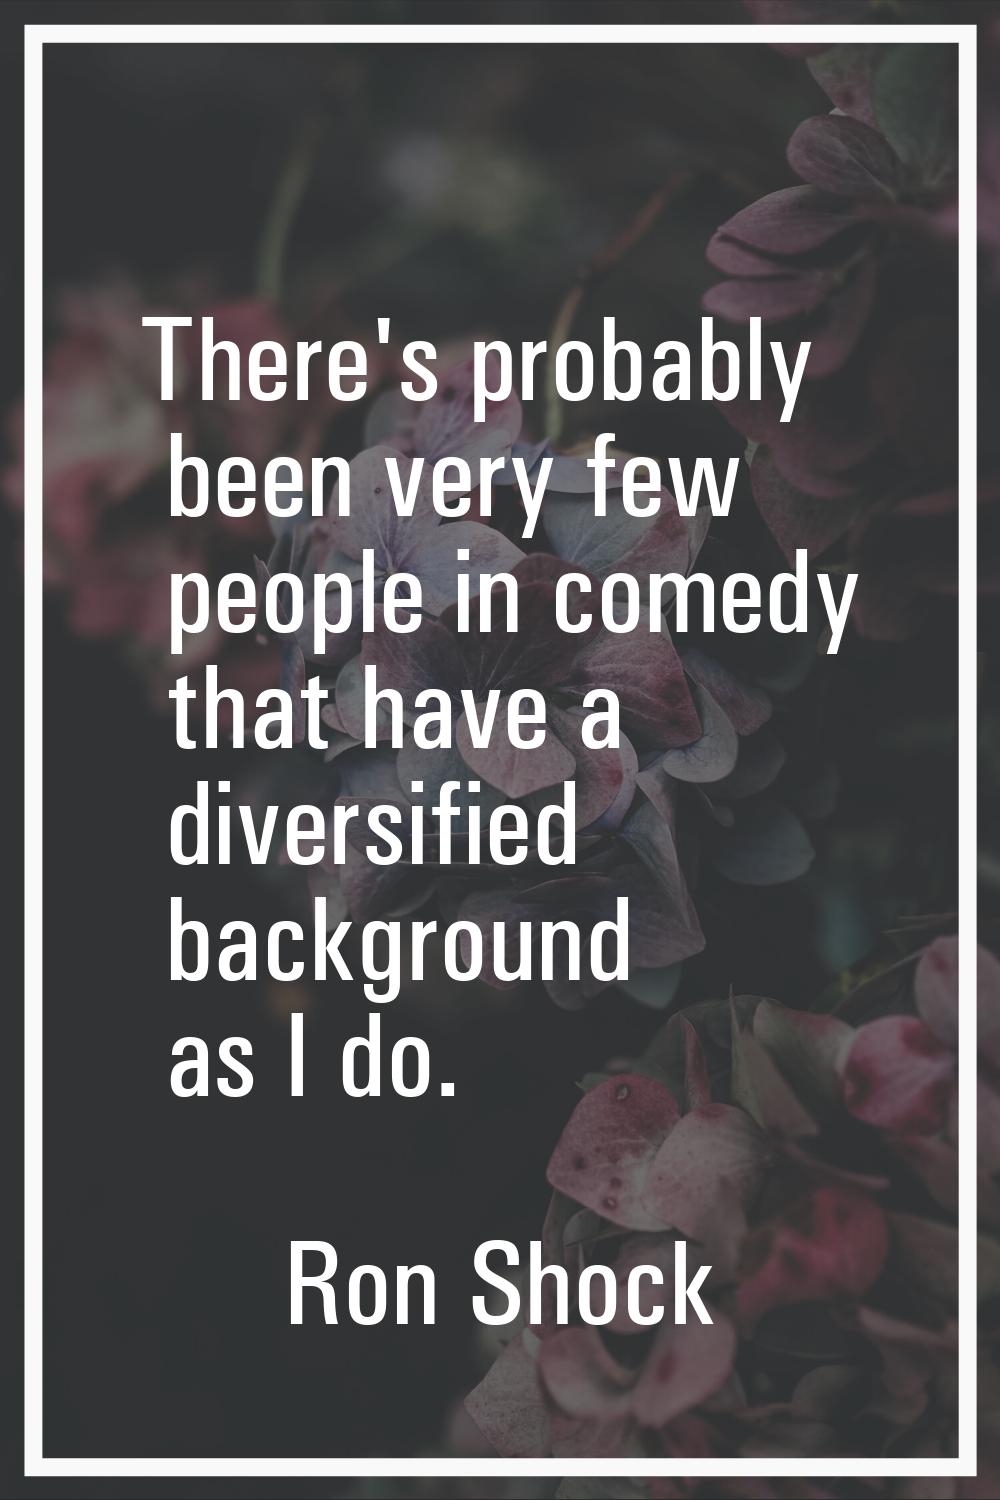 There's probably been very few people in comedy that have a diversified background as I do.